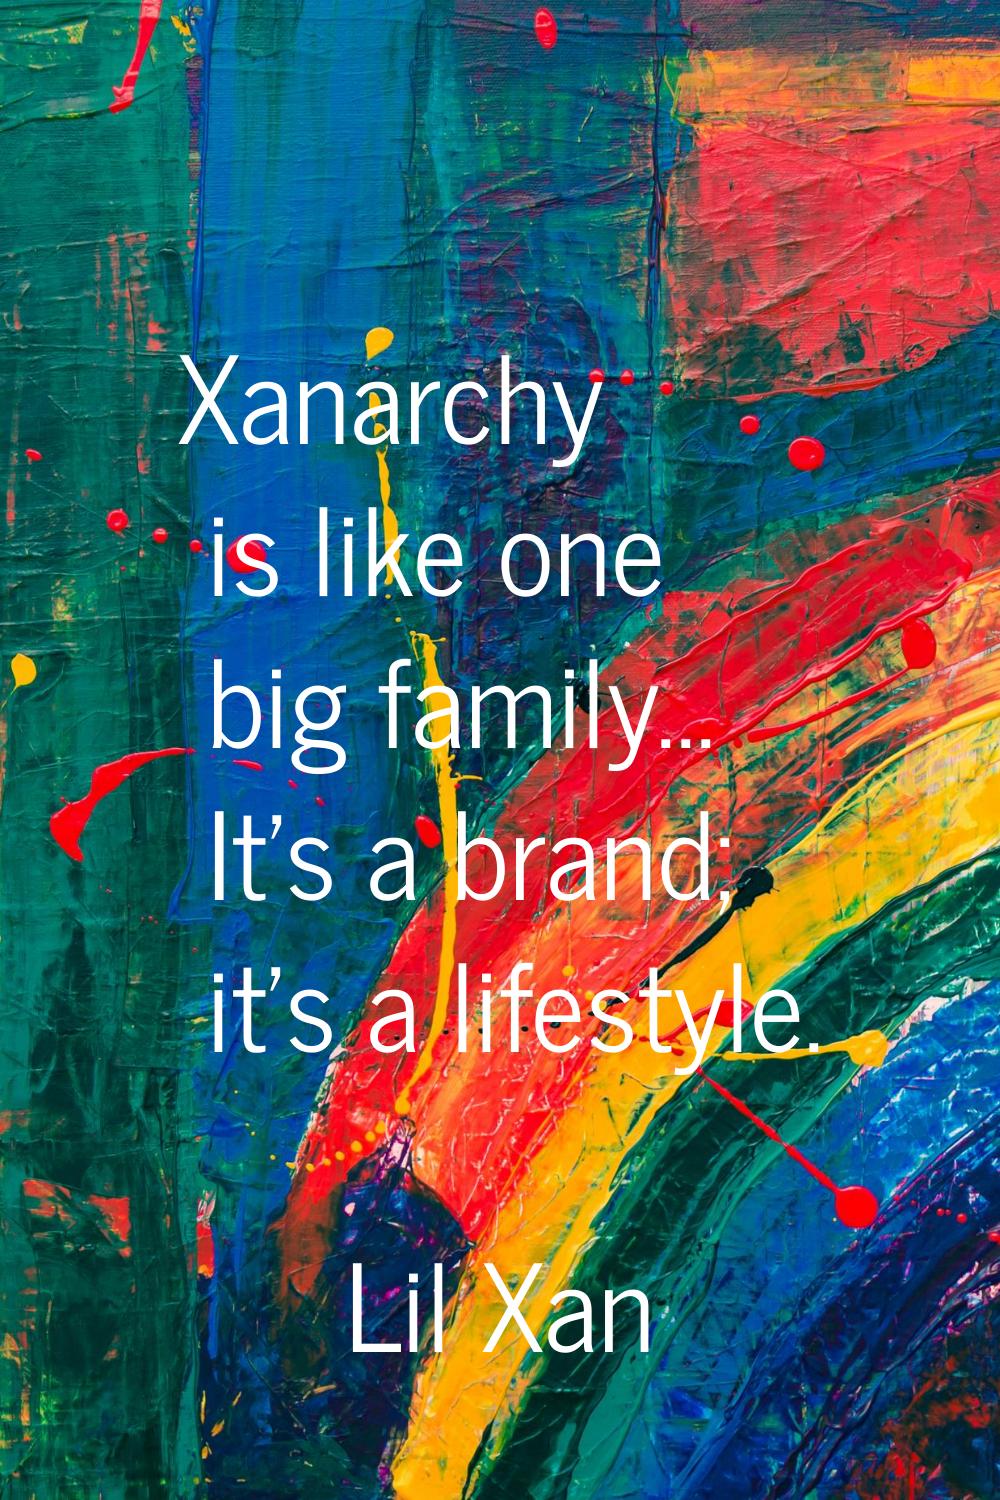 Xanarchy is like one big family... It's a brand; it's a lifestyle.